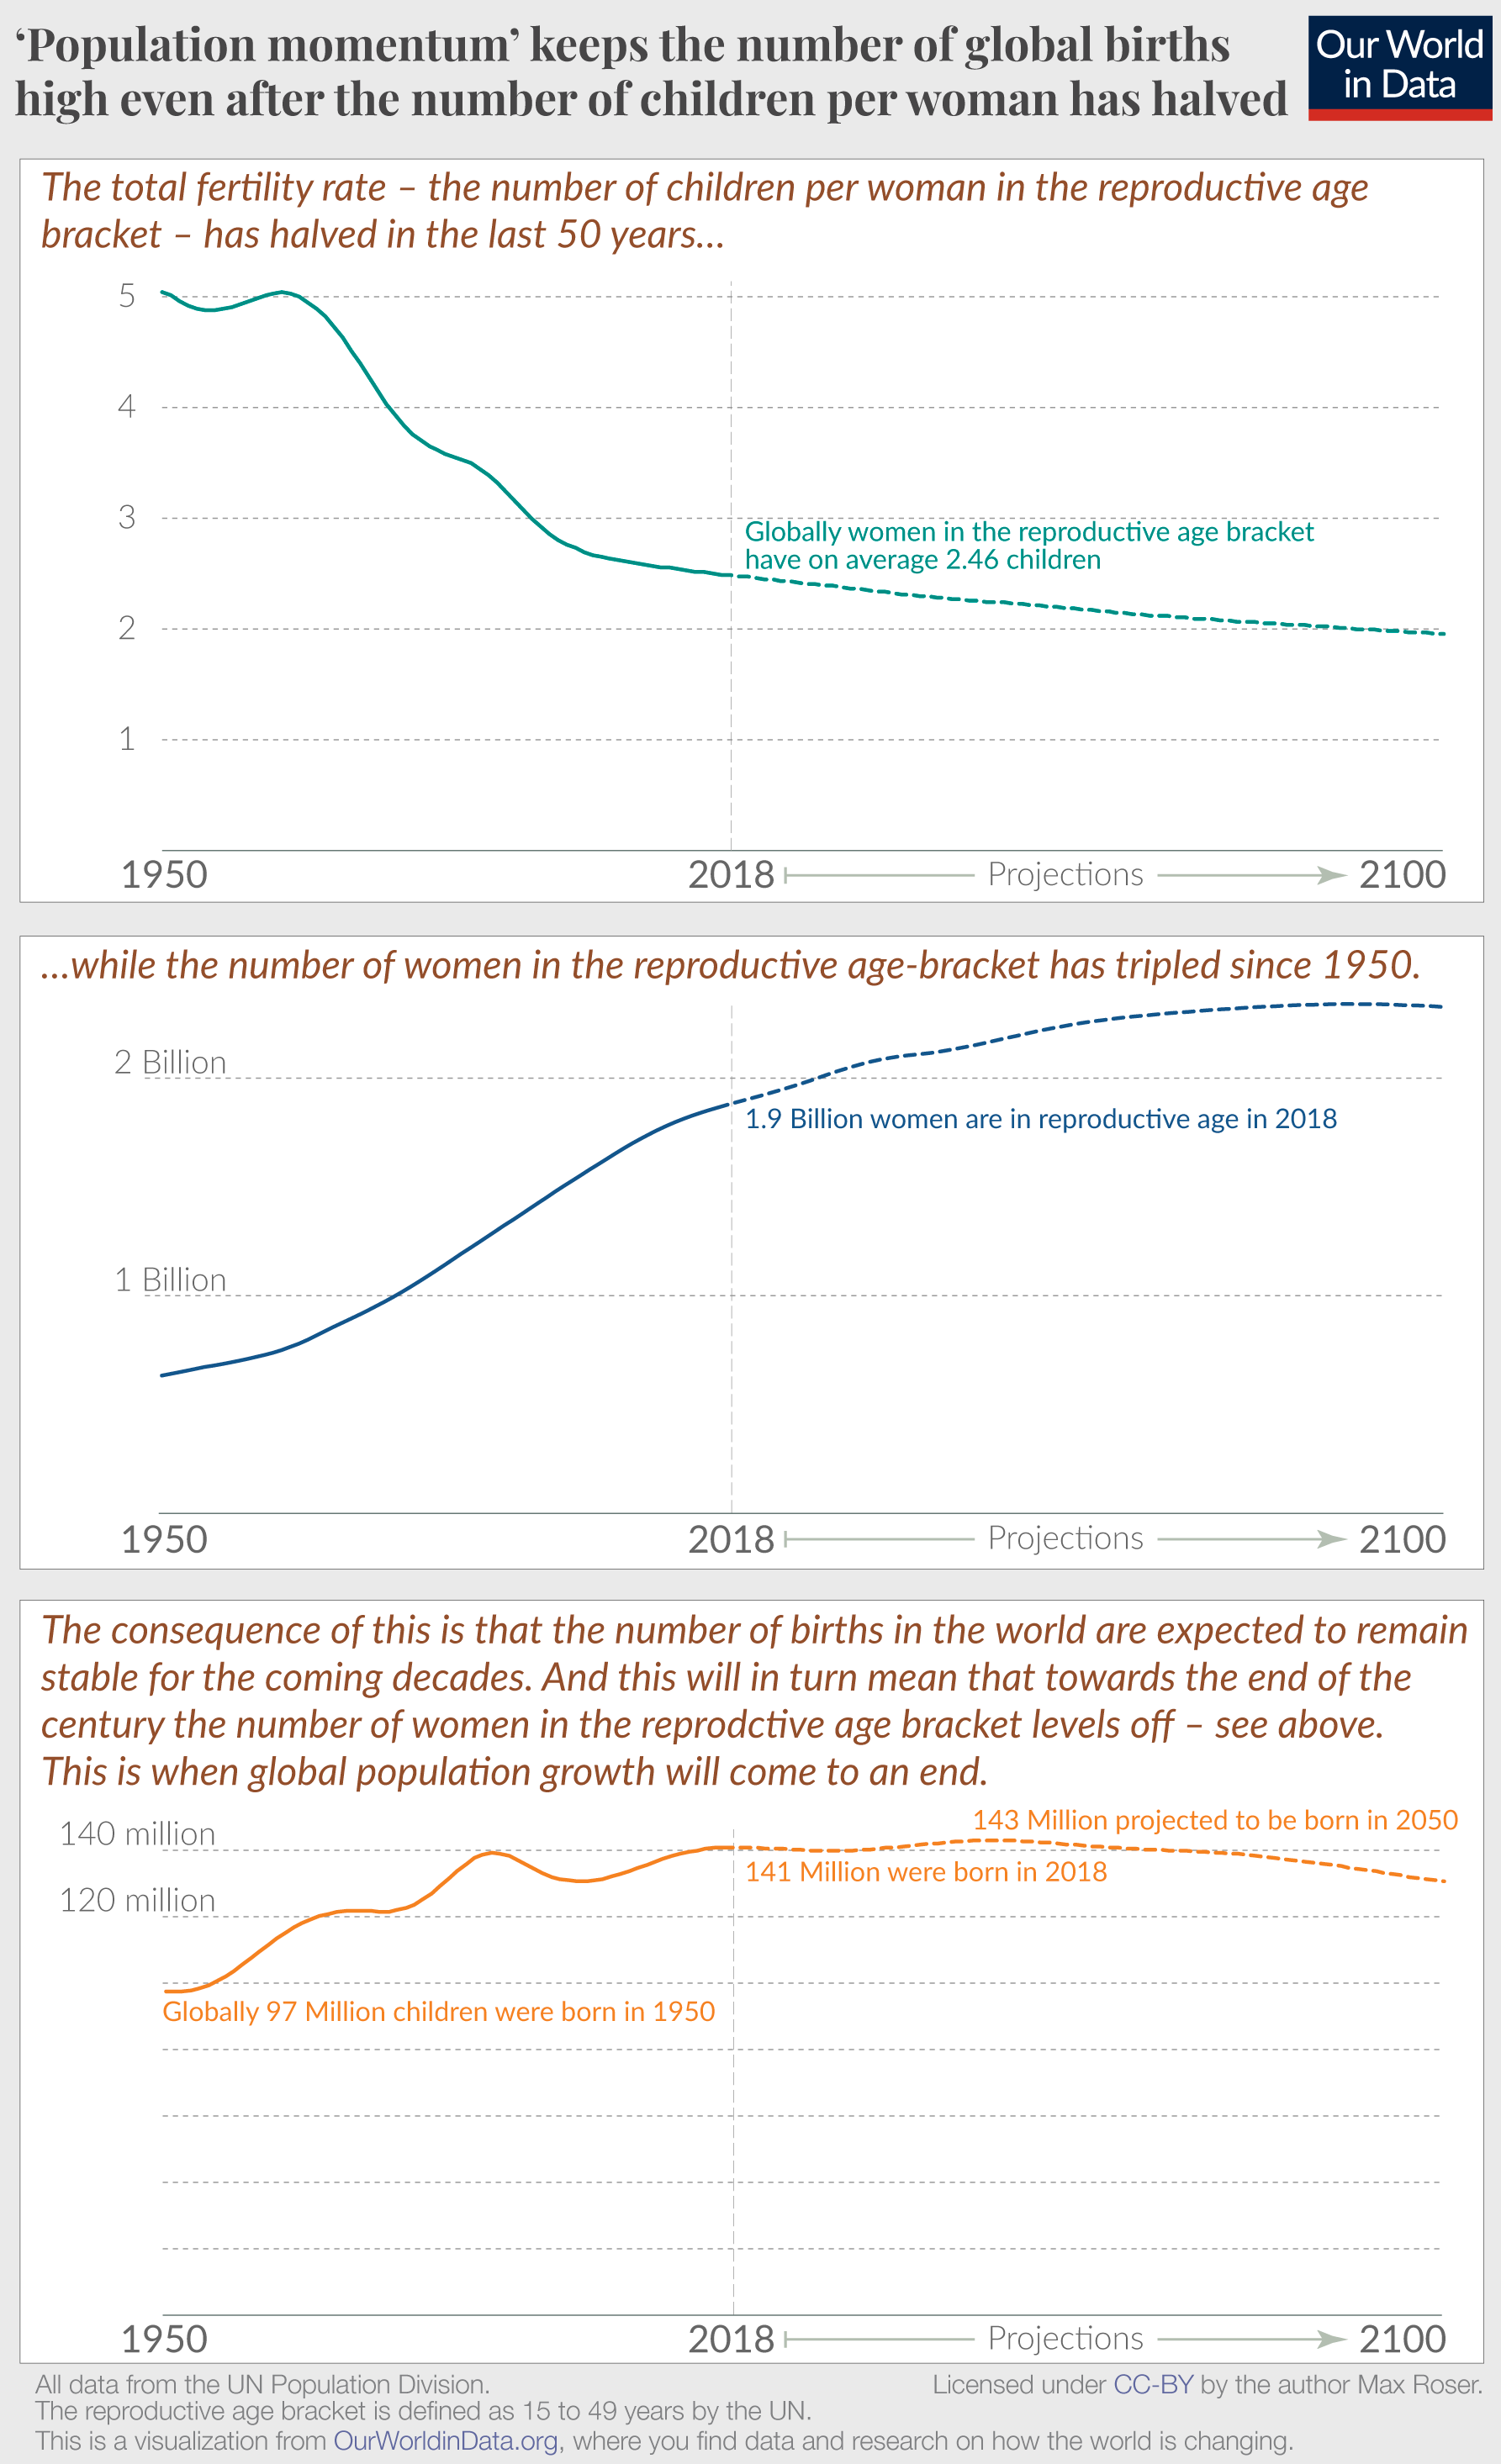 3 line charts that show the fertility rate, number of women in the reproductive age bracket, and number of births.